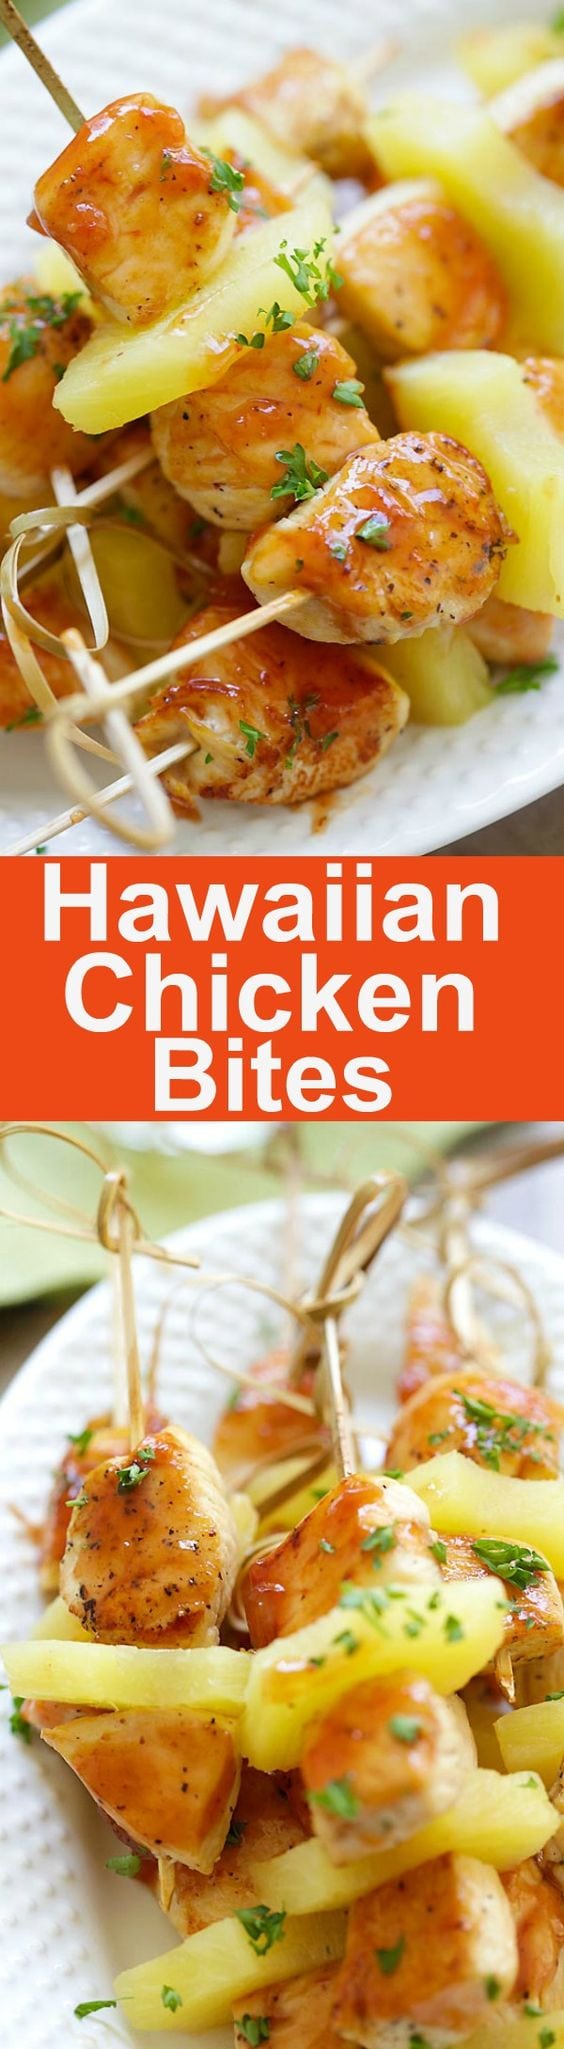 Hawaiian Chicken Bites – amazing chicken skewers with pineapple with Hawaiian BBQ sauce. This recipe is so easy and a crowd pleaser | rasamalaysia.com